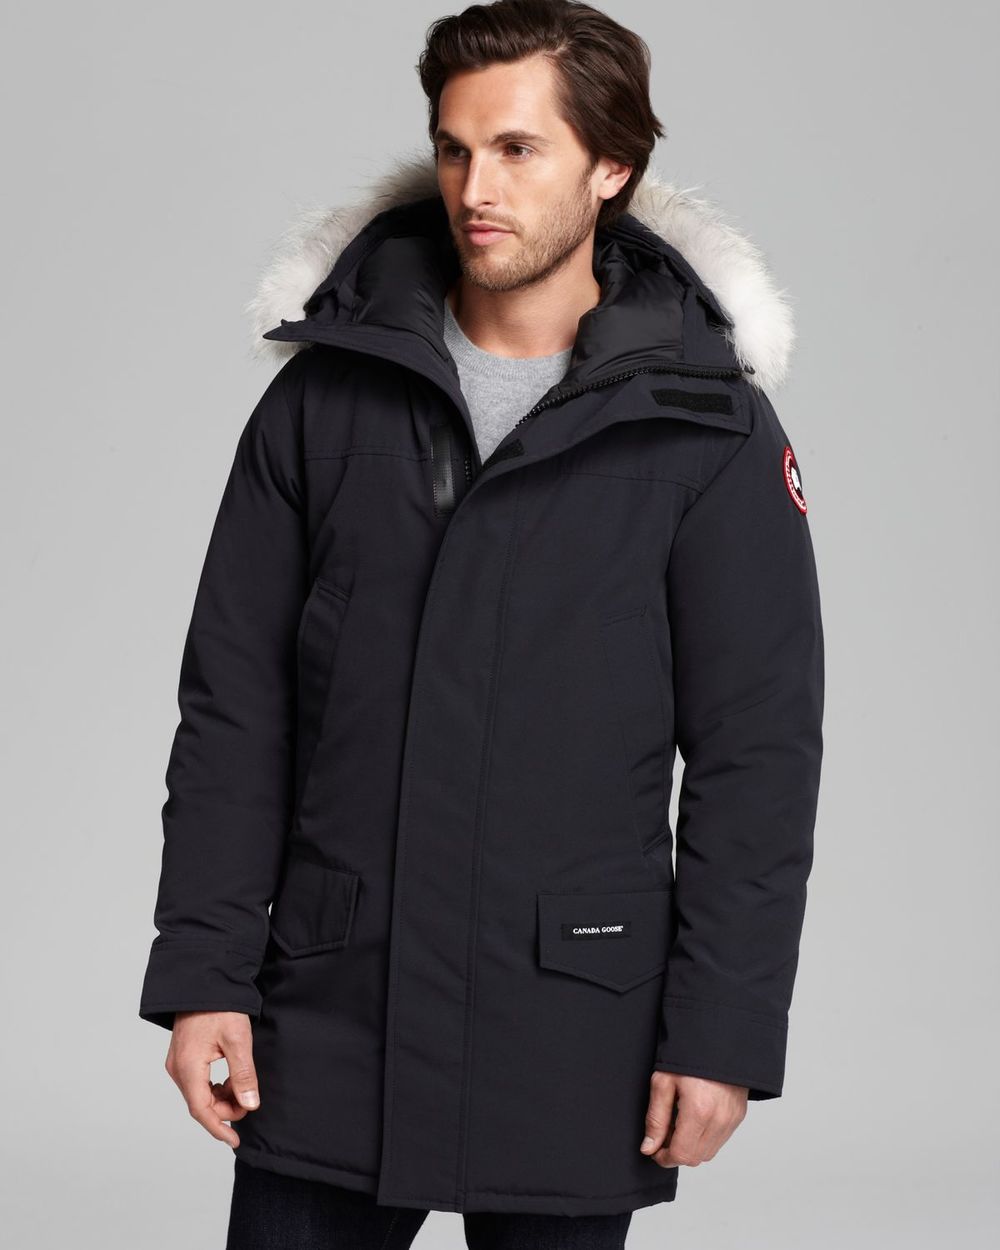 Canada Goose expedition parka sale official - 9 Canada Goose Alternatives To Fit Every Budget �� AS RAKESTRAW ...